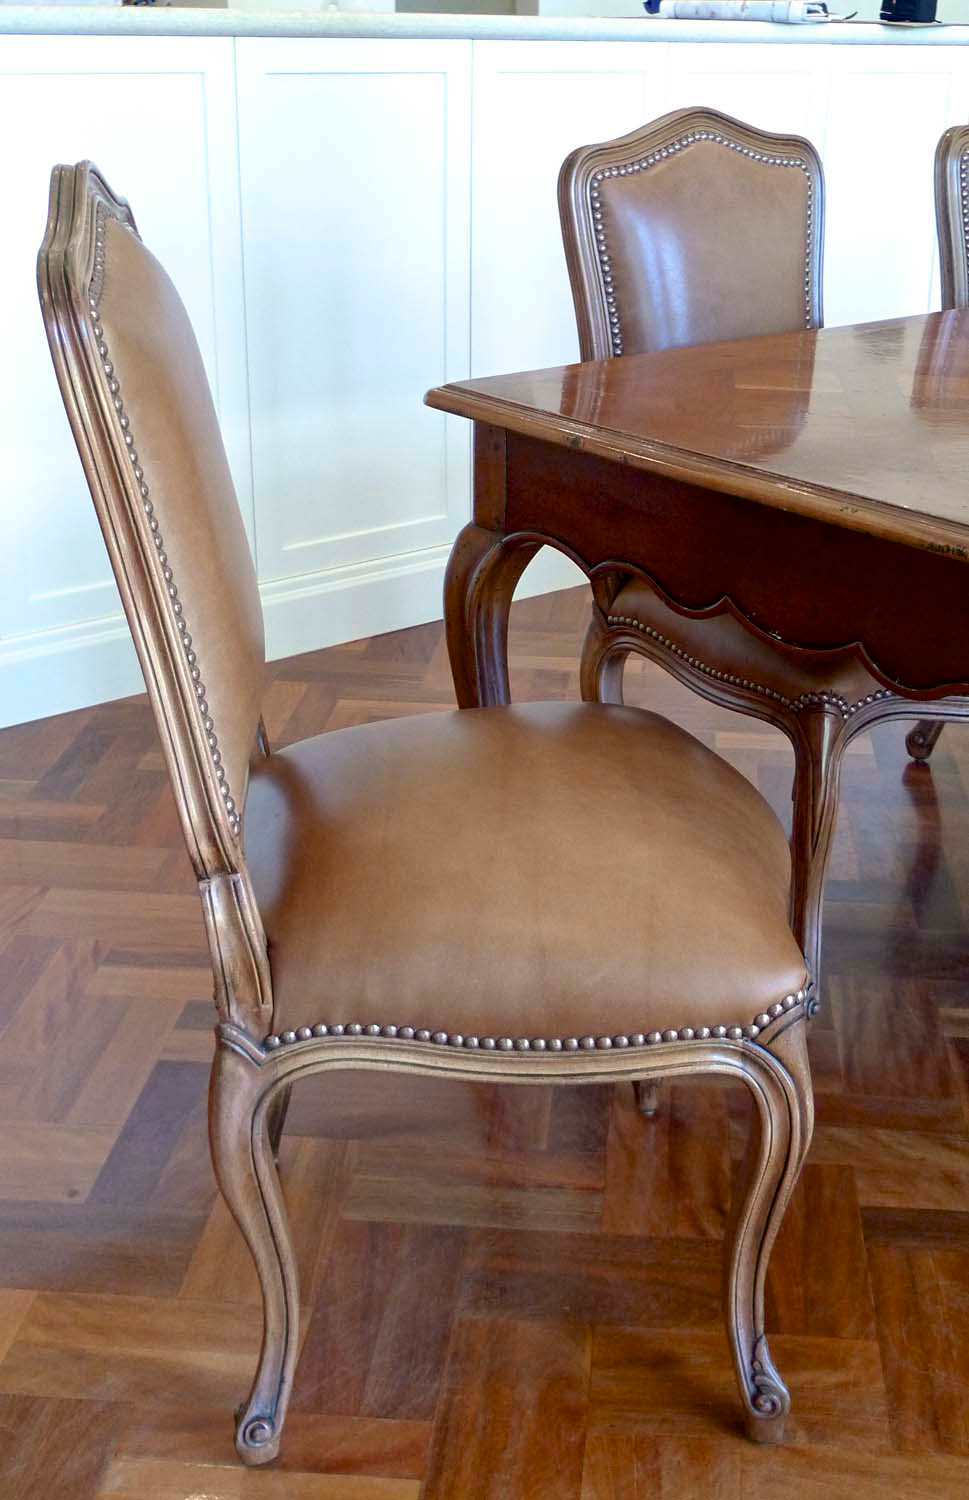 46 French provincial and classical custom made furniture